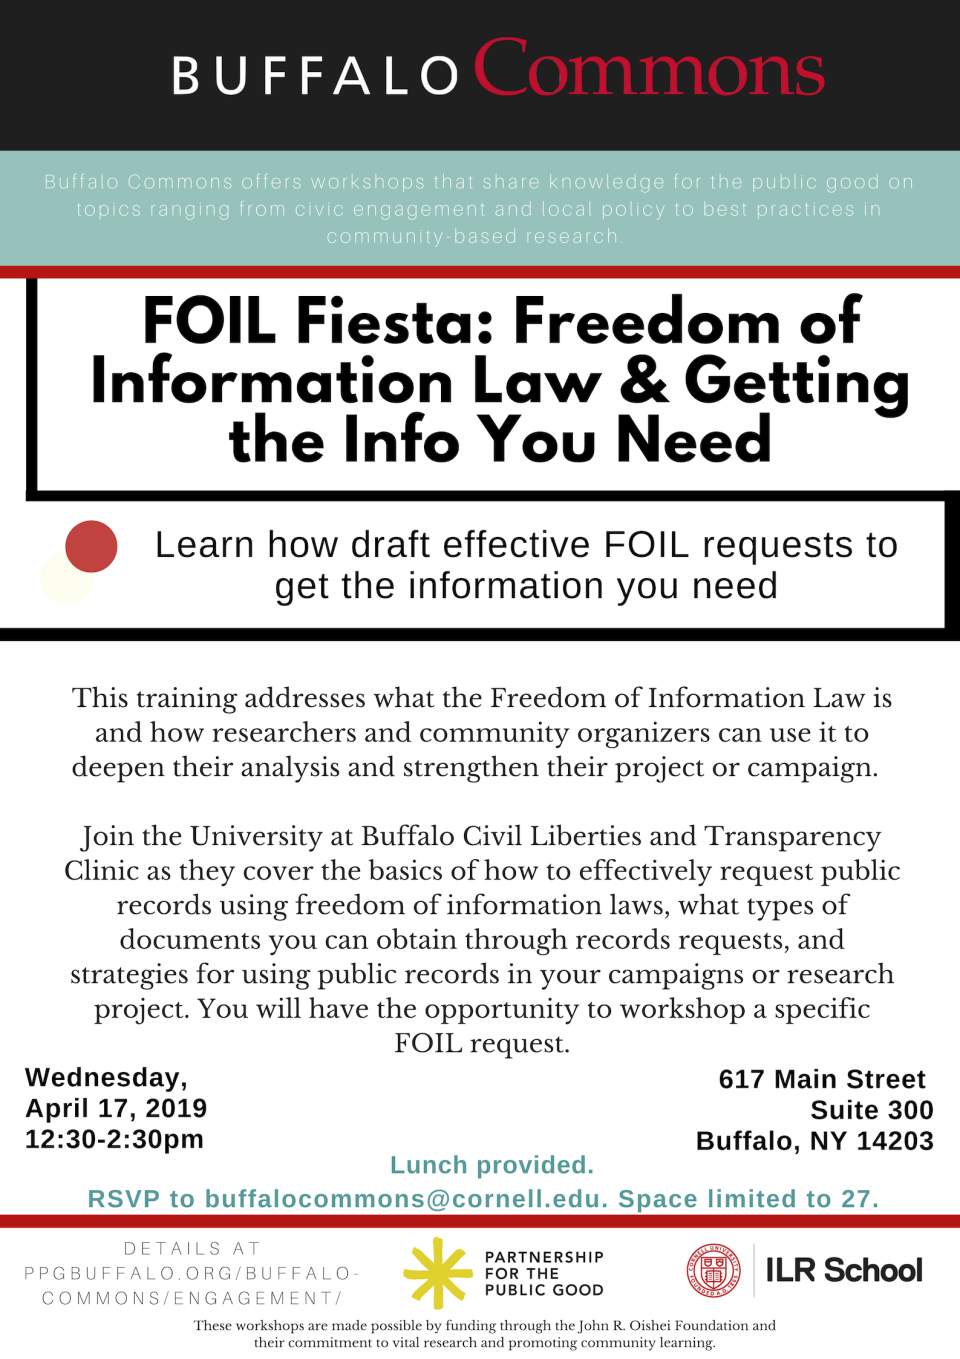 Foil Fiesta: Freedom of Information Law & Getting the Info You Need